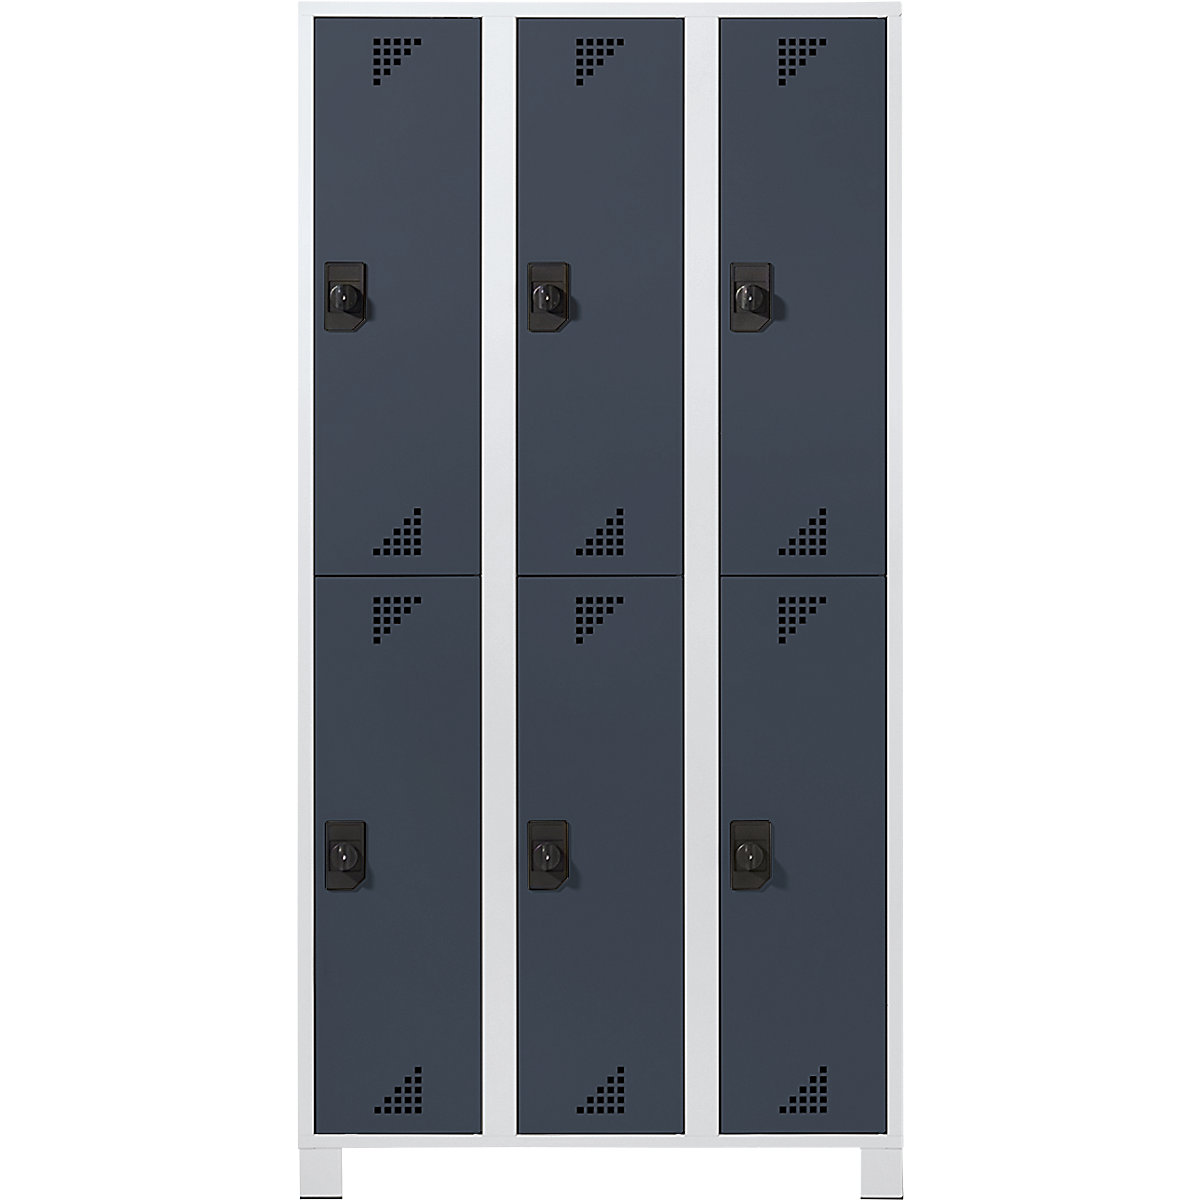 Cloakroom locker with half-height compartments – eurokraft pro